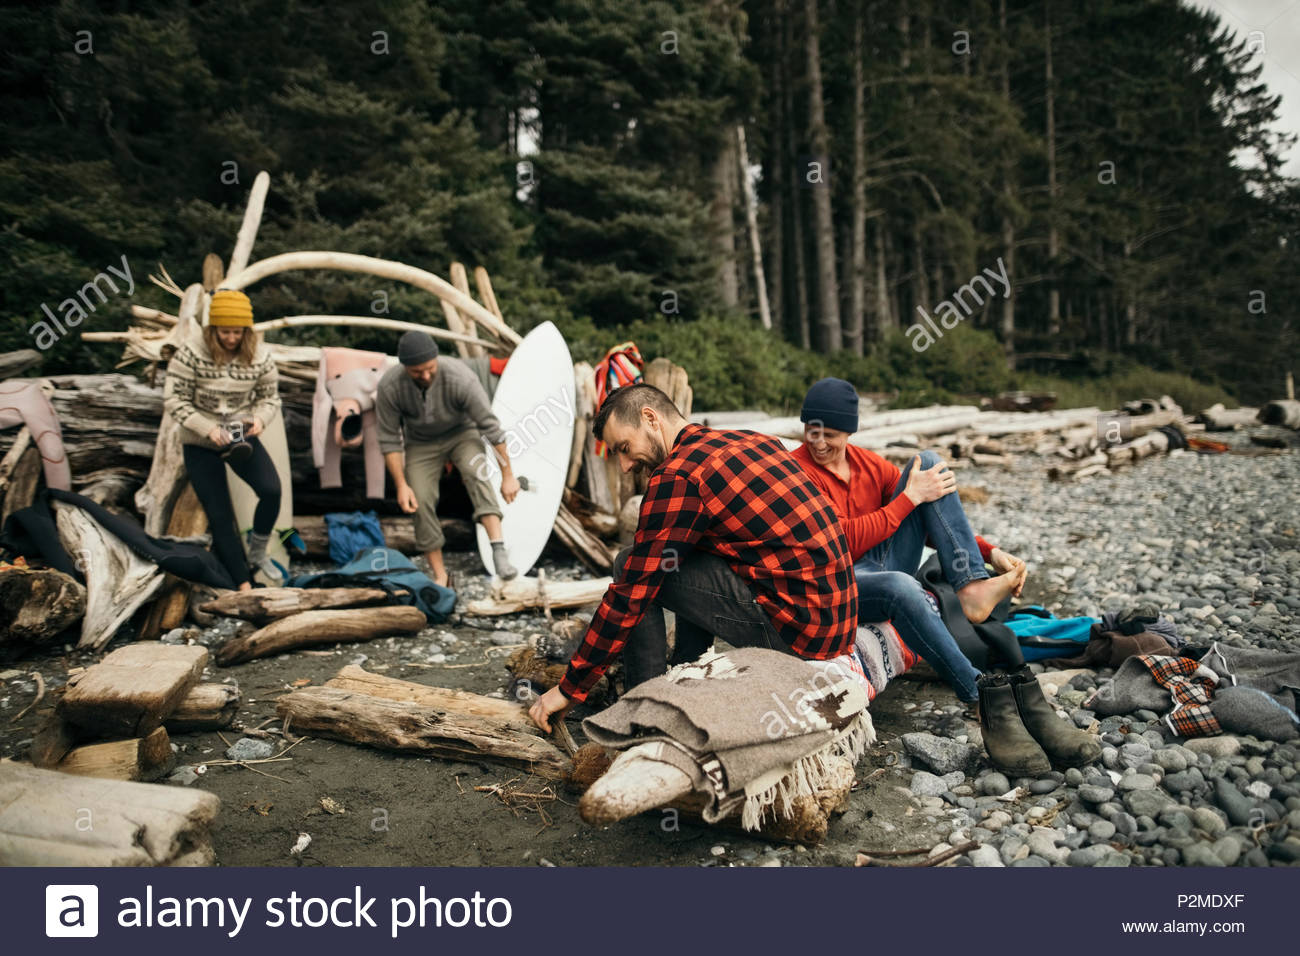 Friends enjoying weekend surfing getaway, relaxing at campsite on rugged beach Stock Photo